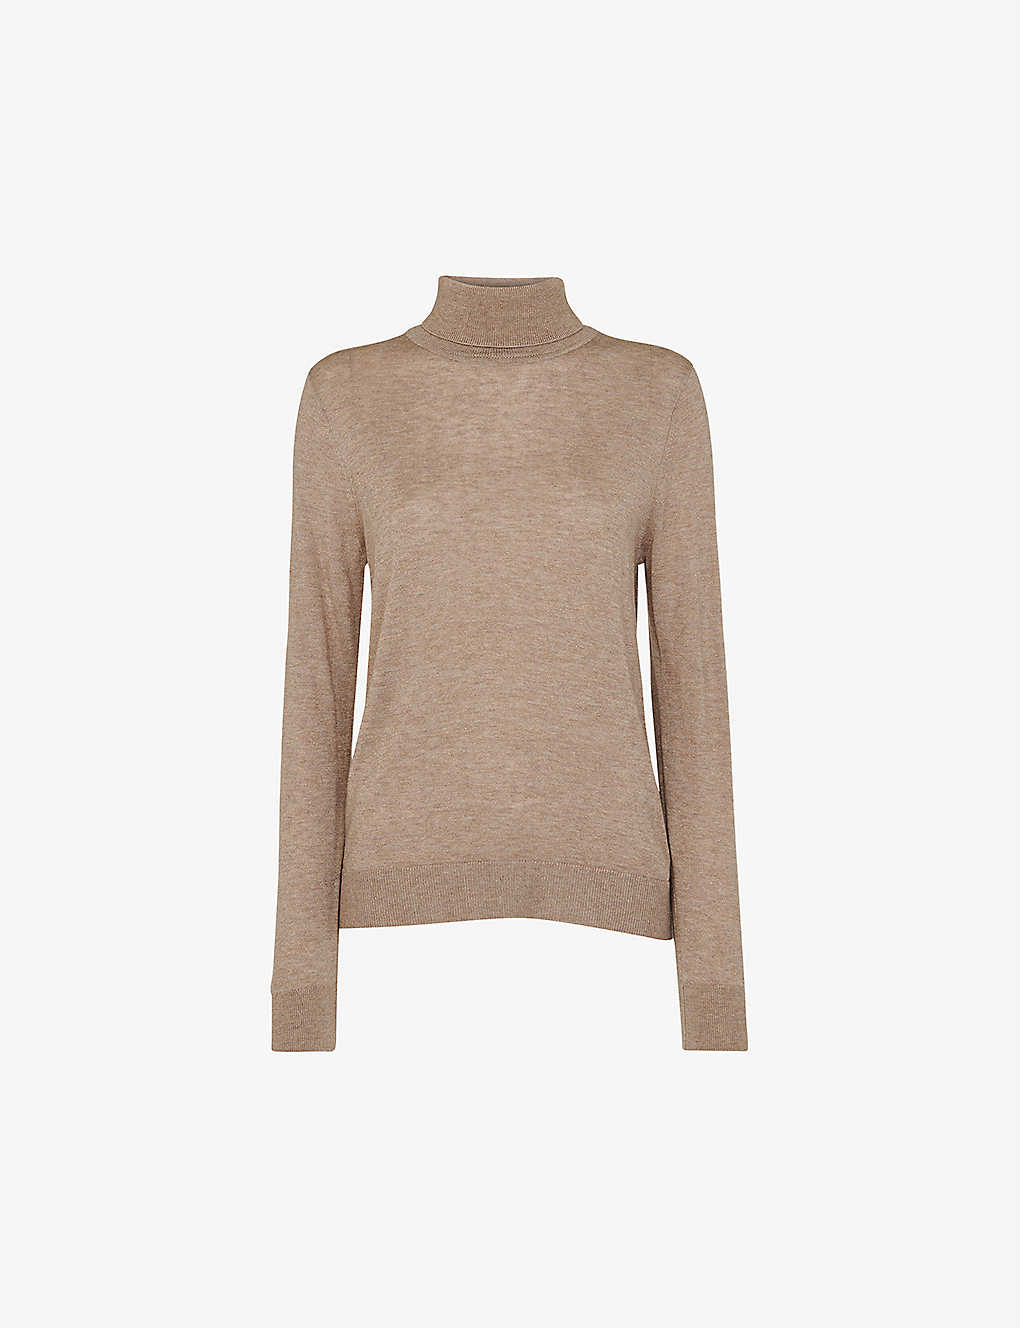 Whistles Sparkle Knit Sweater In Oatmeal